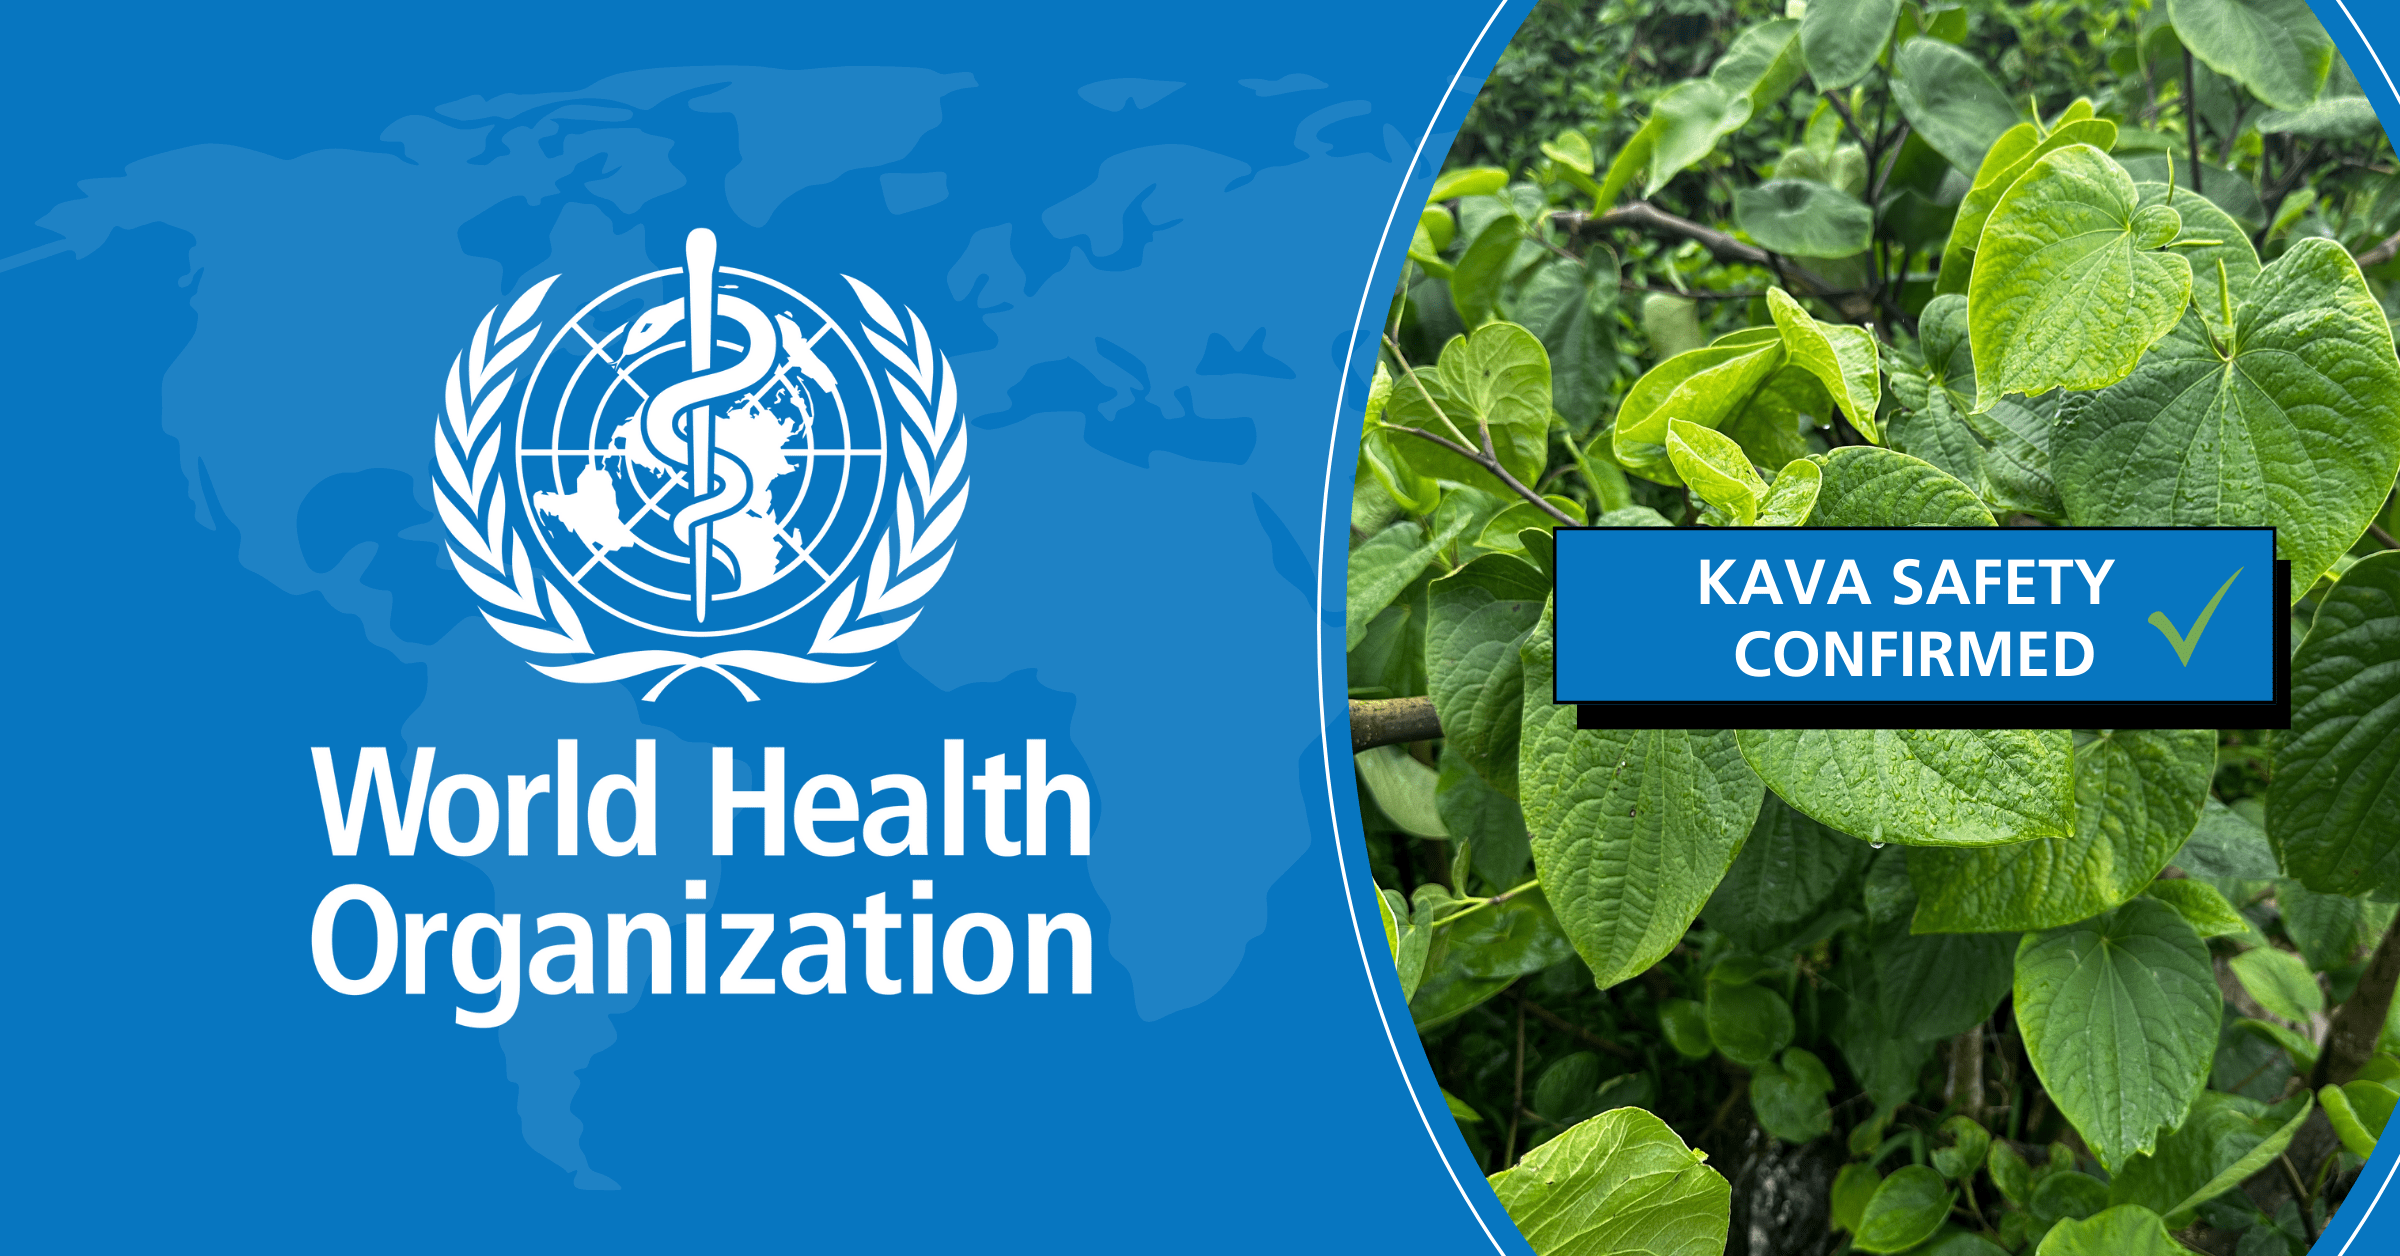 Kava is safe confirmed by the World Health Organization.